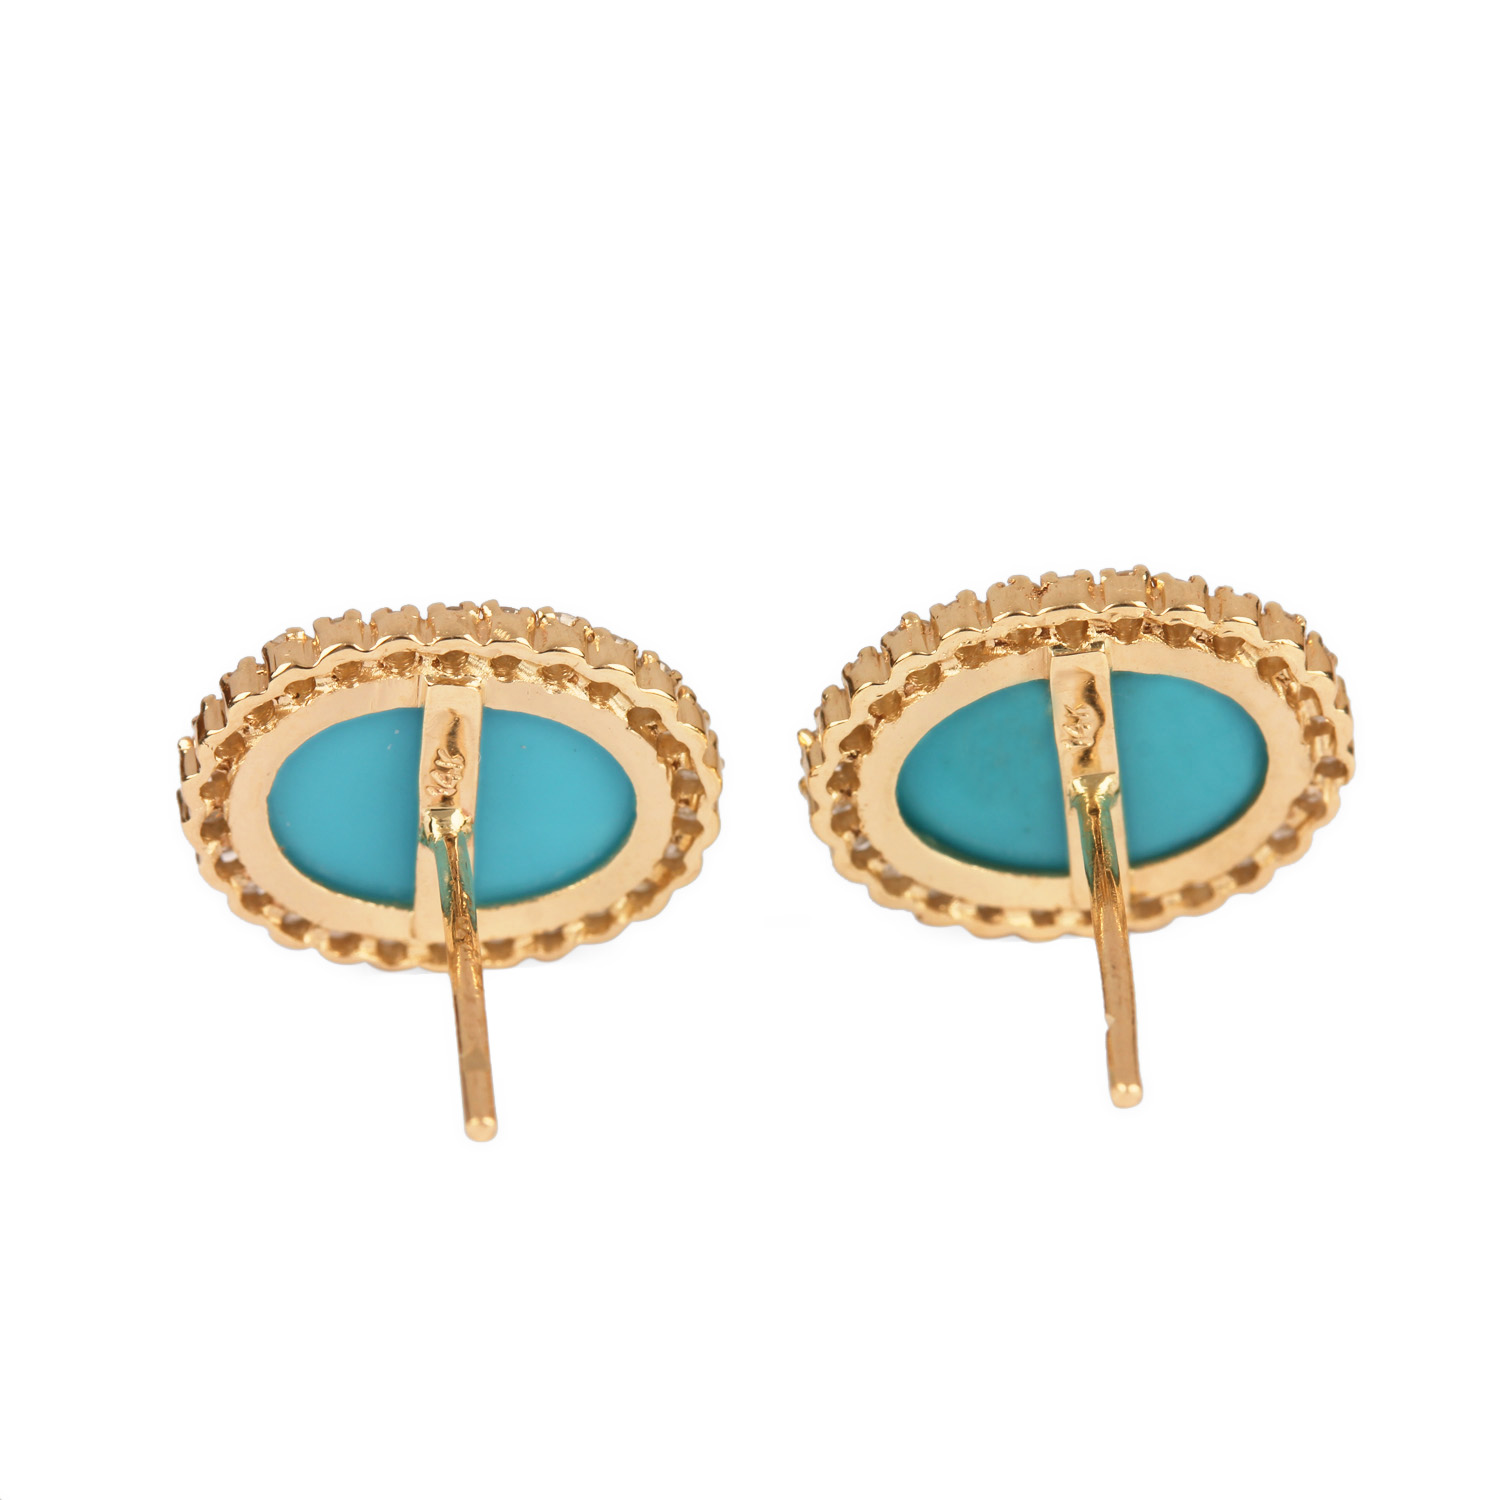 Turquoise Gemstone Stud Earrings 14K Solid Gold Natural Diamond Jewelry